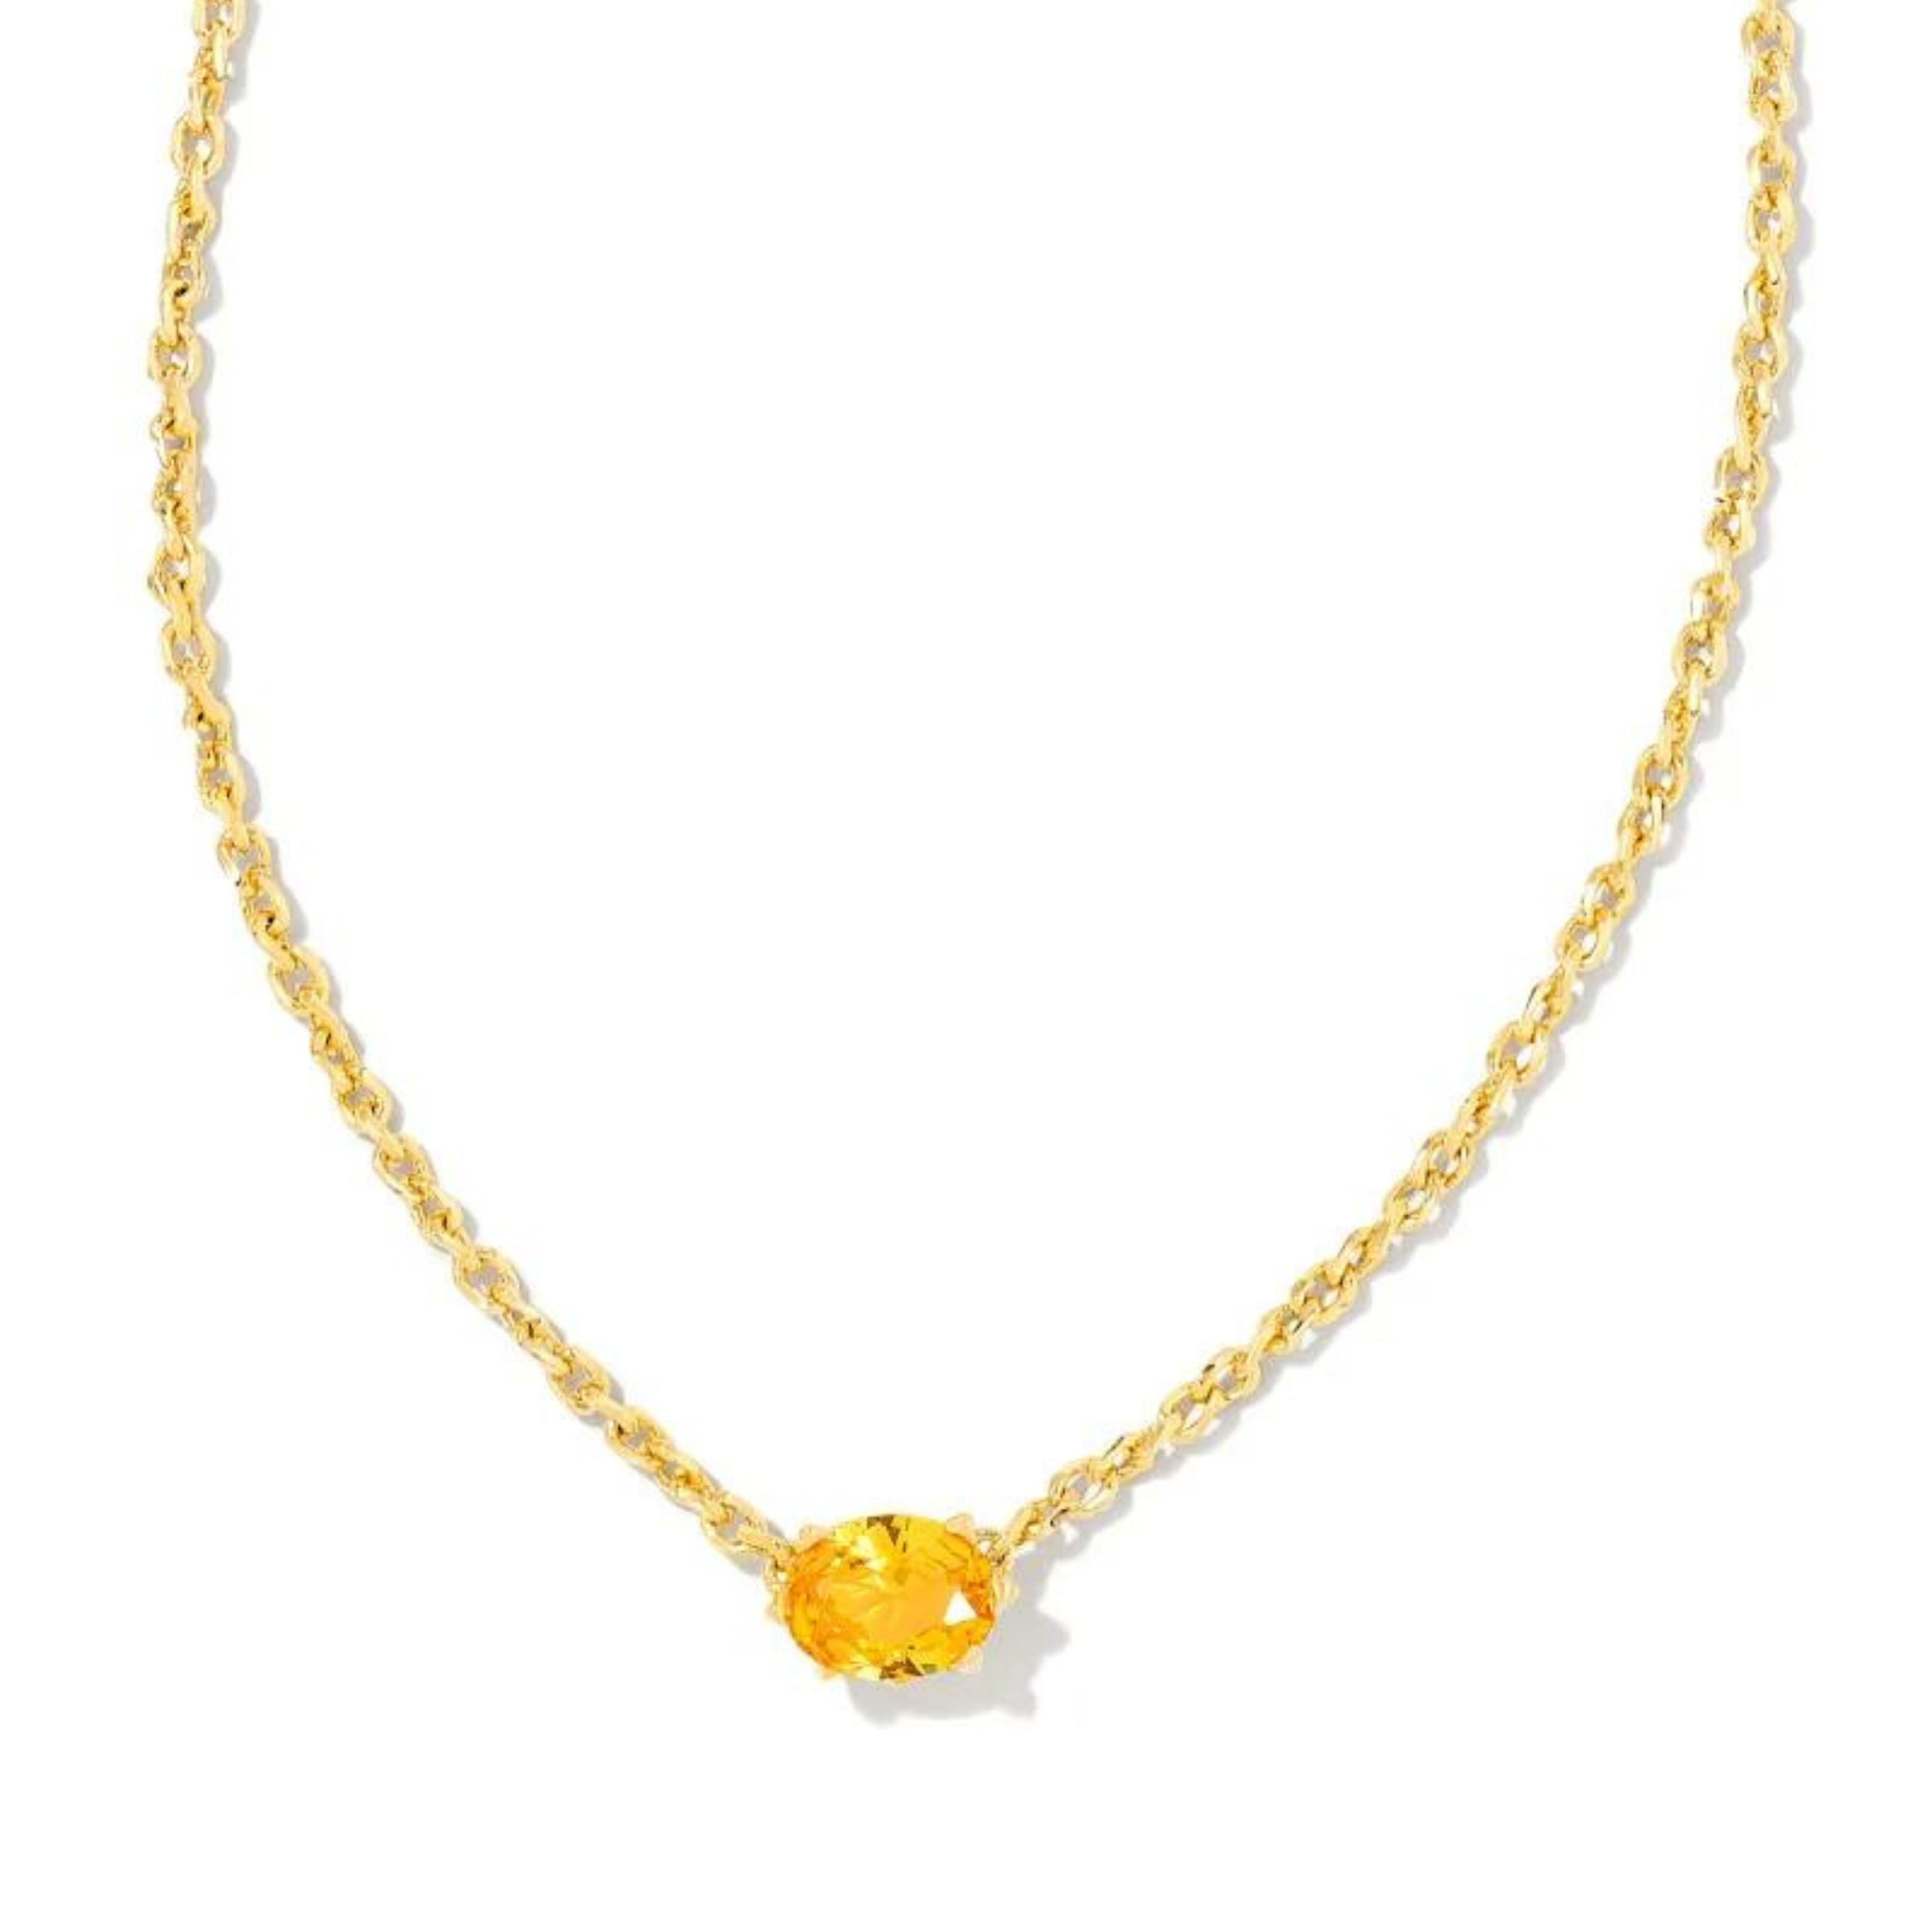 Gold necklace with golden yellow crystal pendant, pictured on a white background.